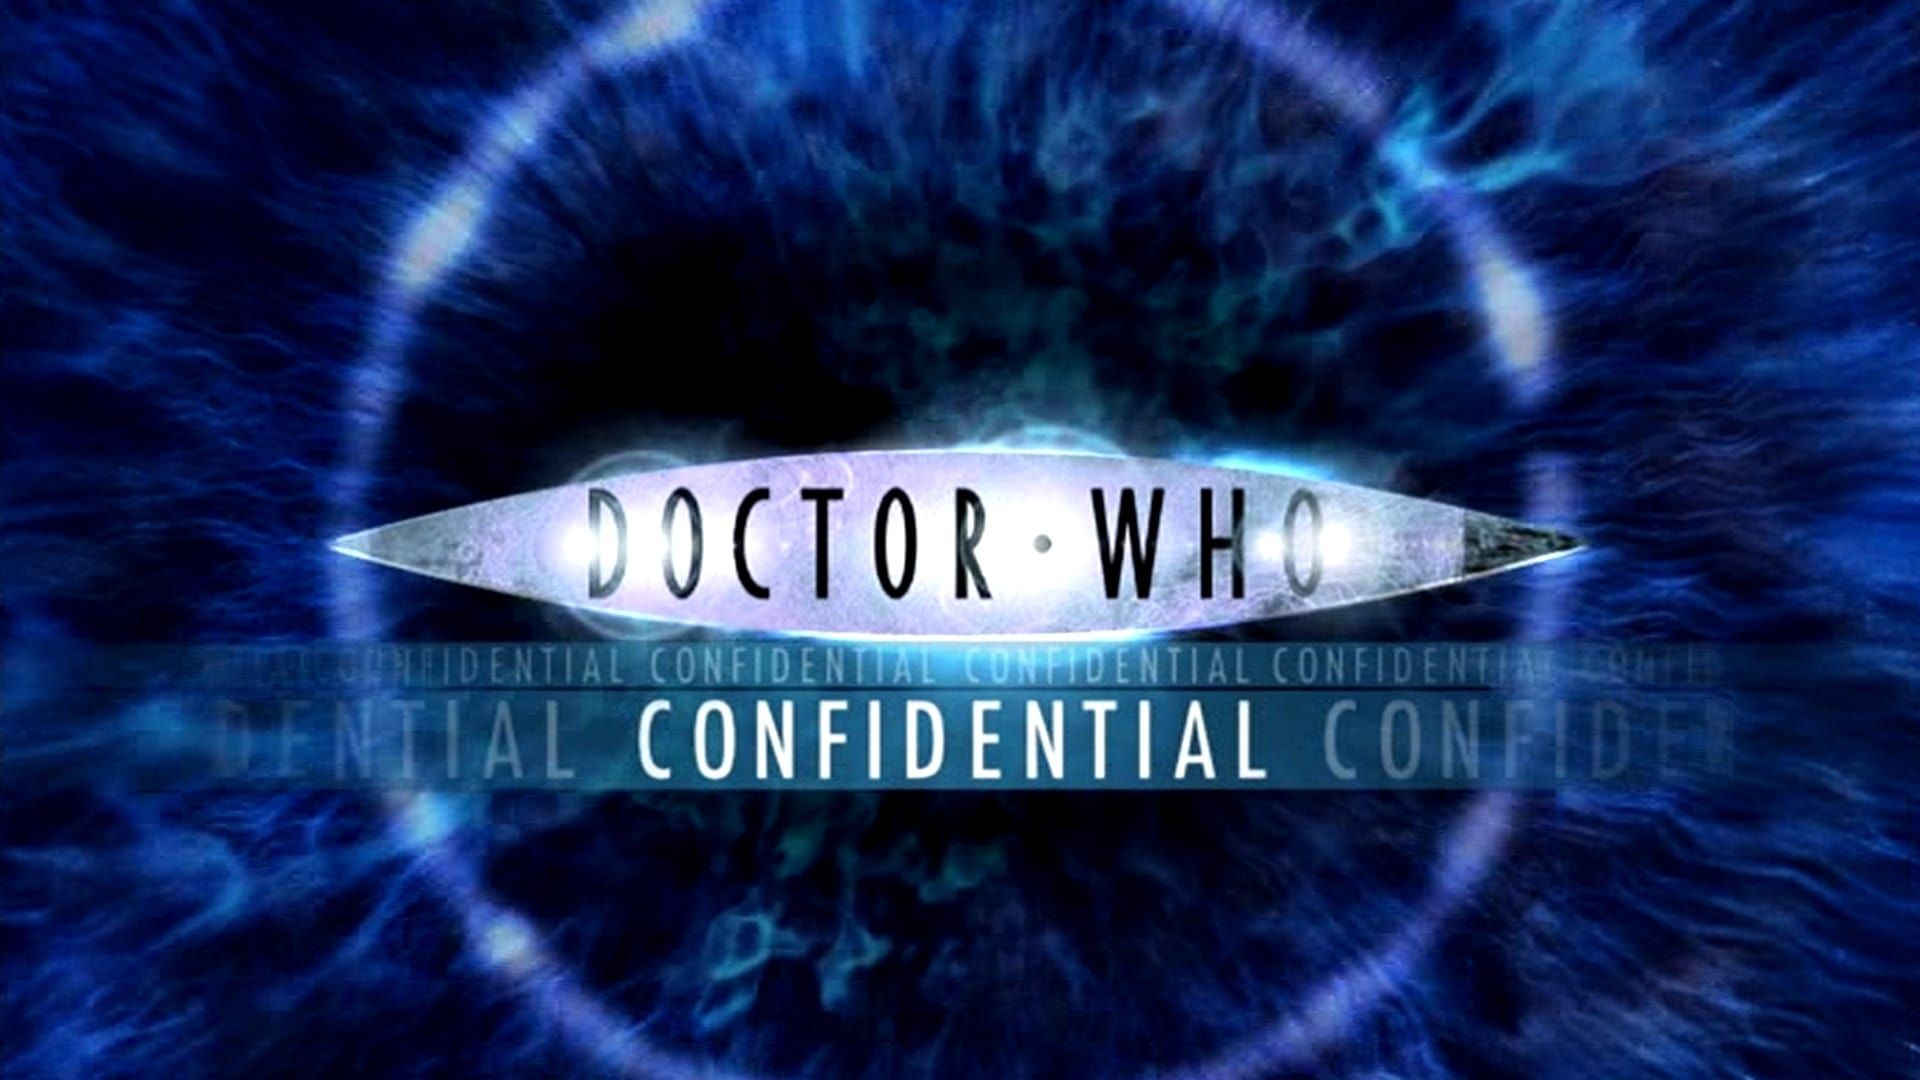 Watch Doctor Who Online, Stream Seasons 1-13 Now